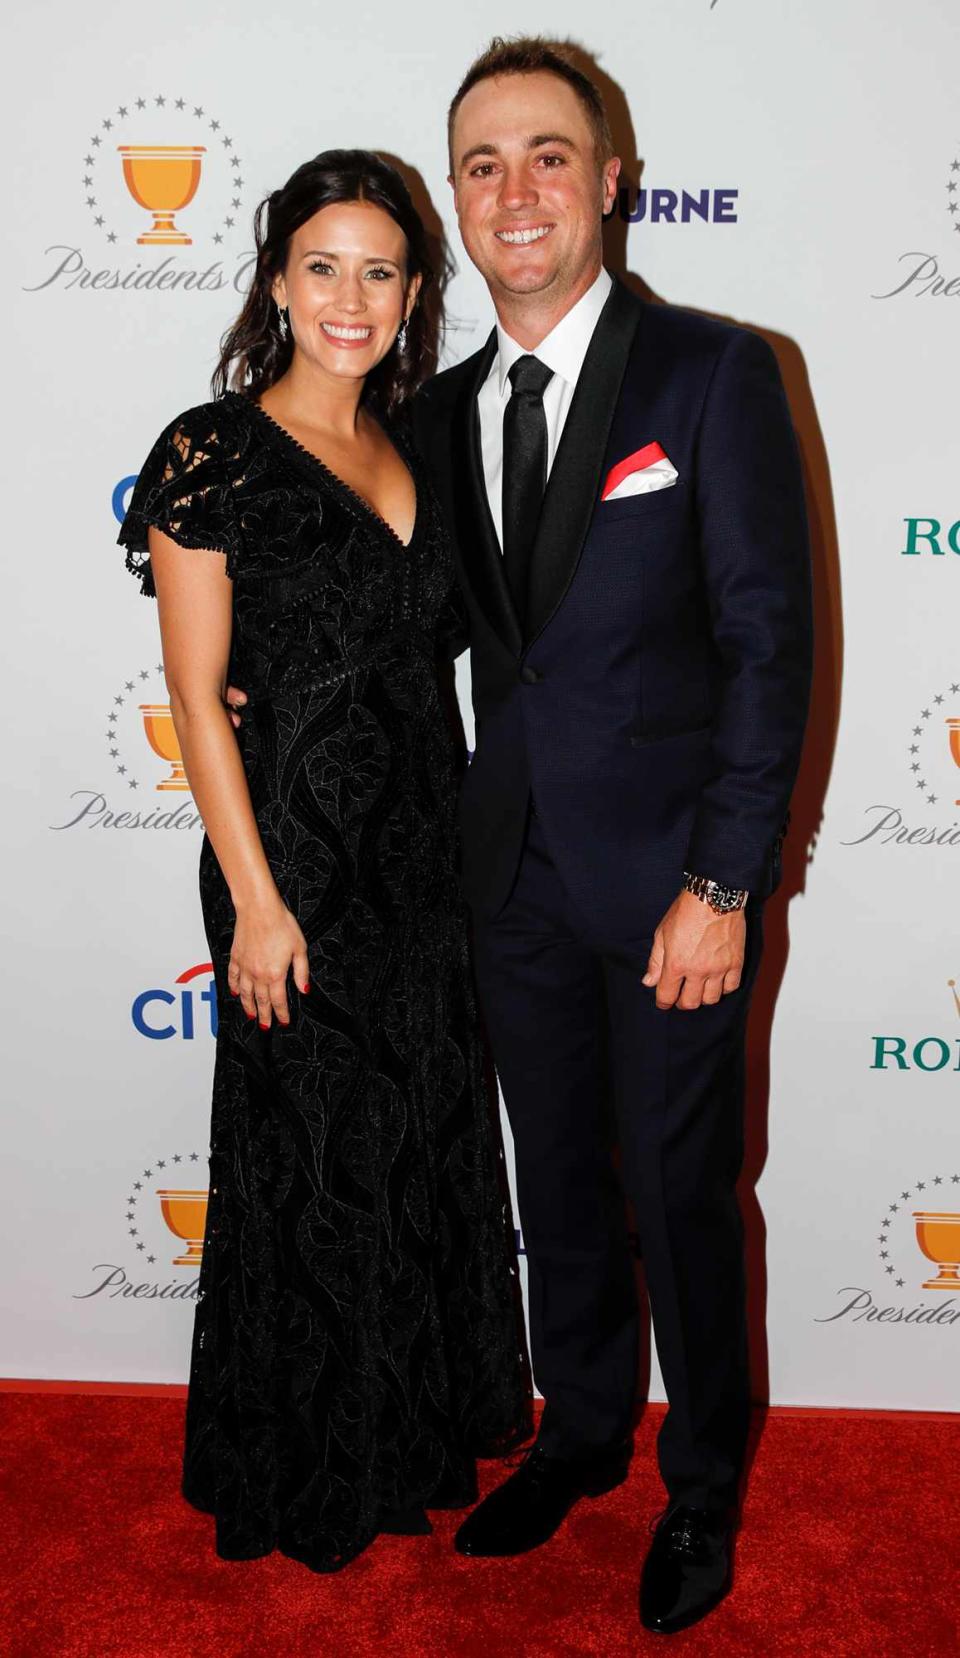 Justin Thomas and his partner Jillian Wisniewski on the red carpet before the Presidents Cup at The Royal Melbourne Golf Club on December 10, 2019 in Melbourne, Australia